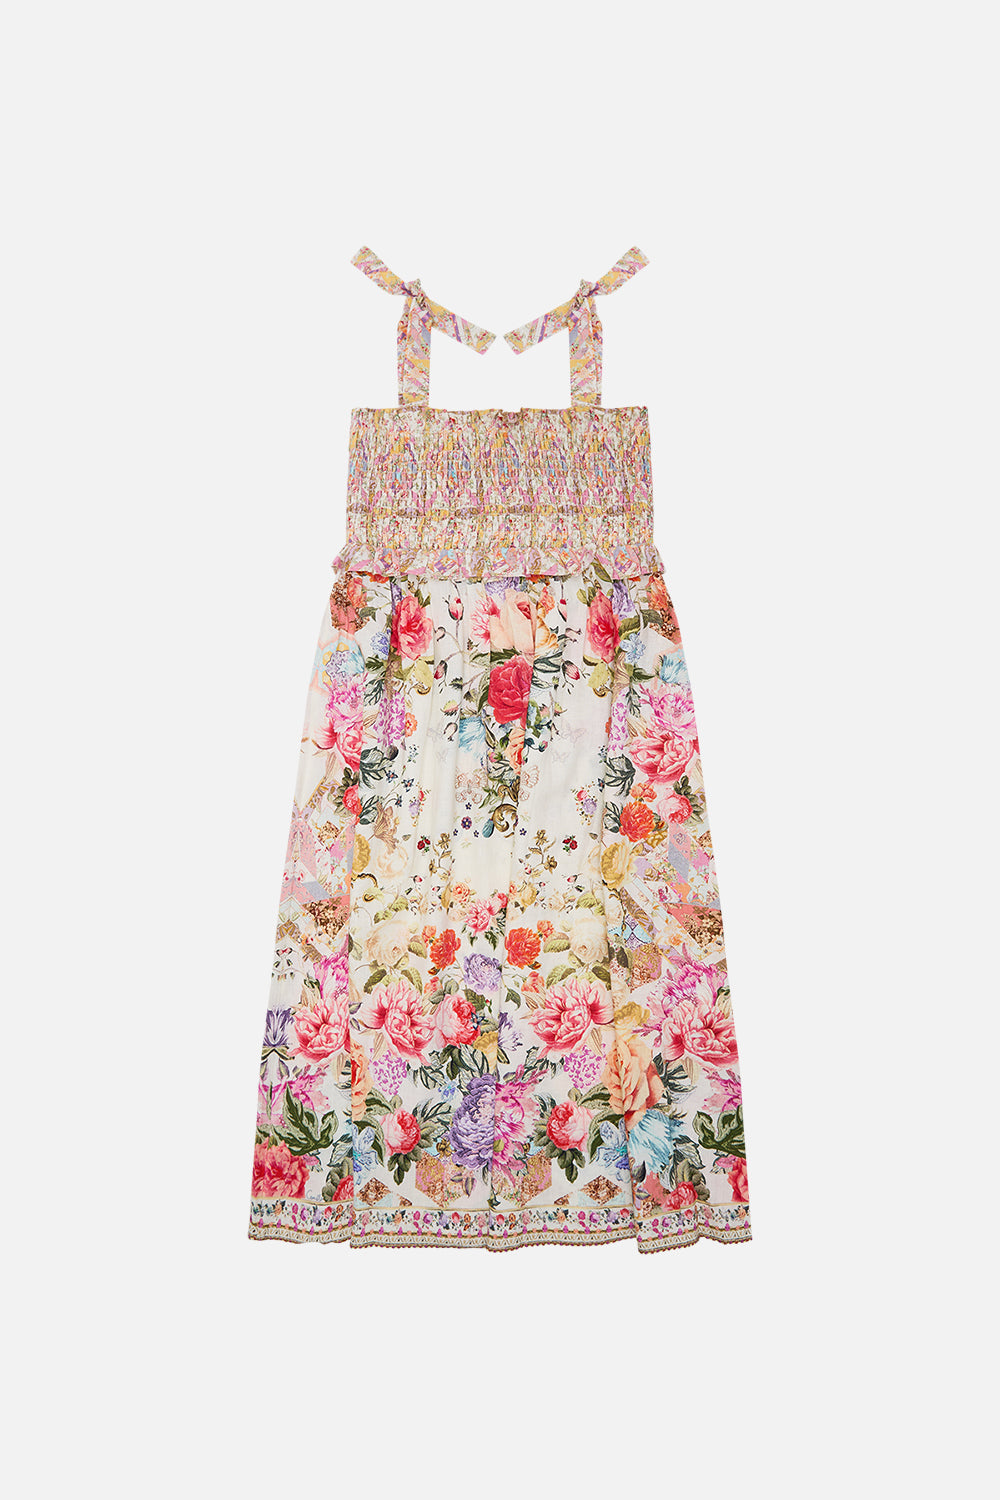 Milla by CAMILLA floral kids maxi dress with shirring pockets (12-14) in Sew Yesterday